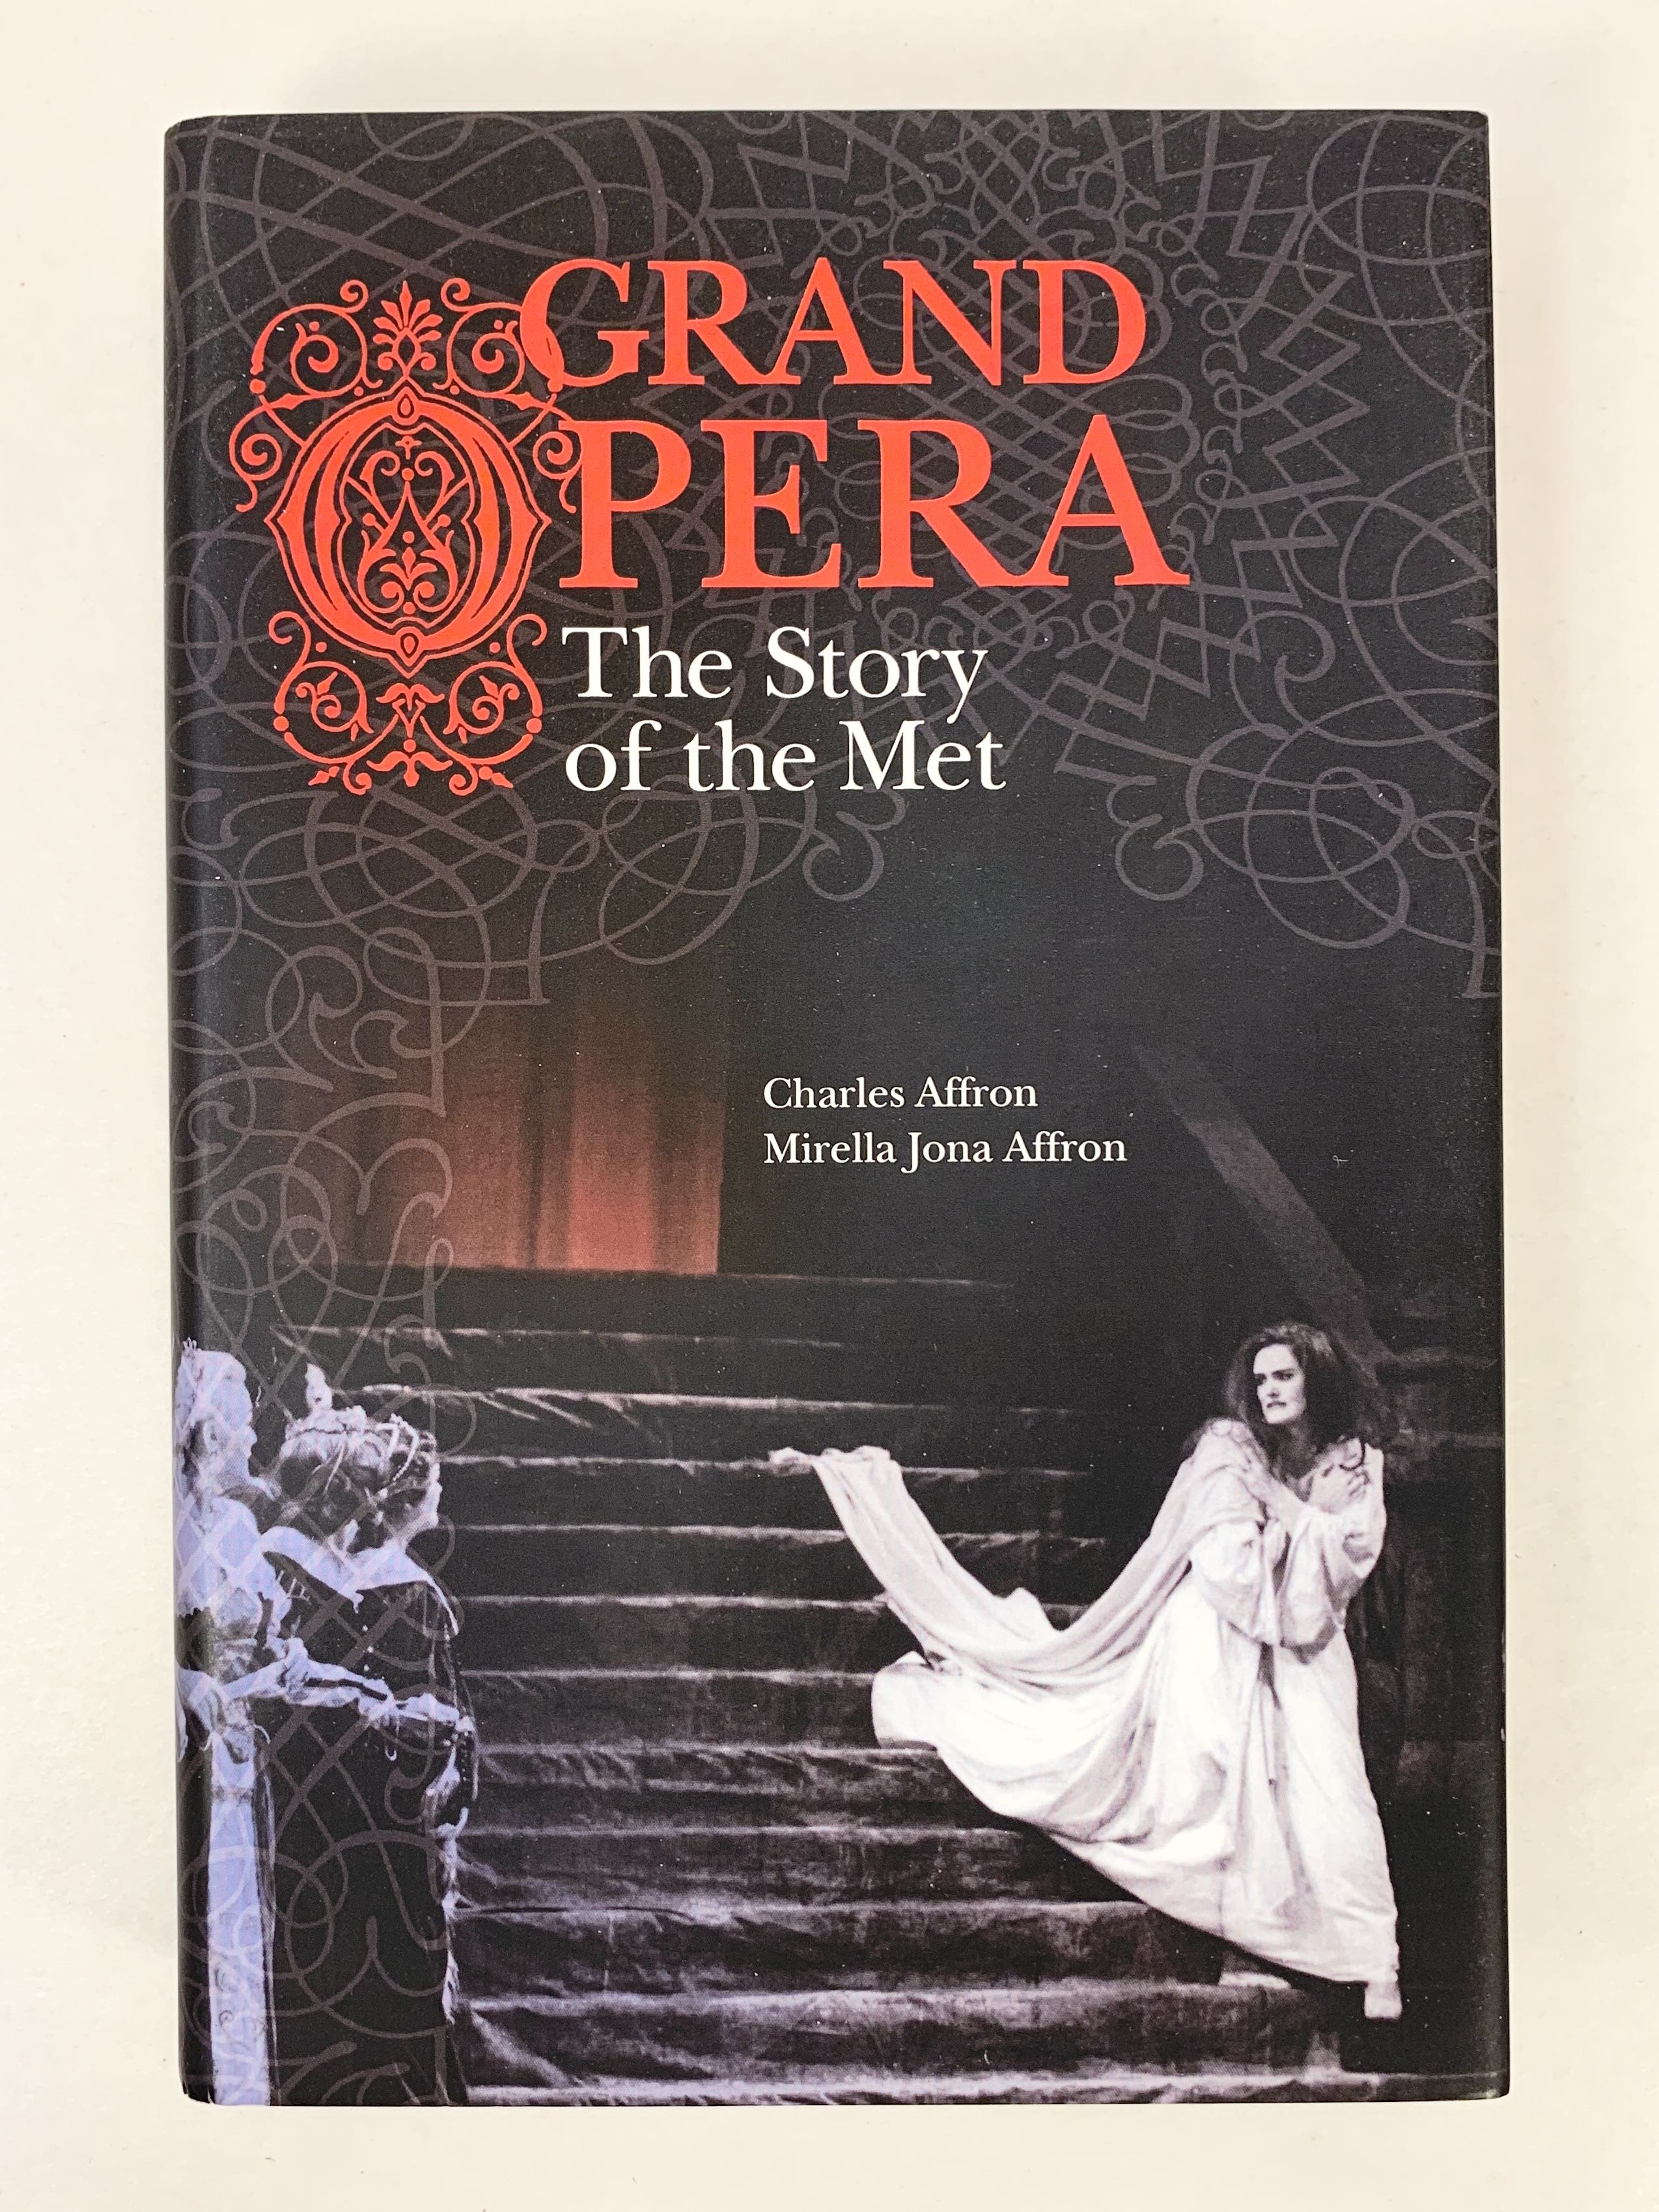 Grand Opera The Story of the Met - Affron, Charles